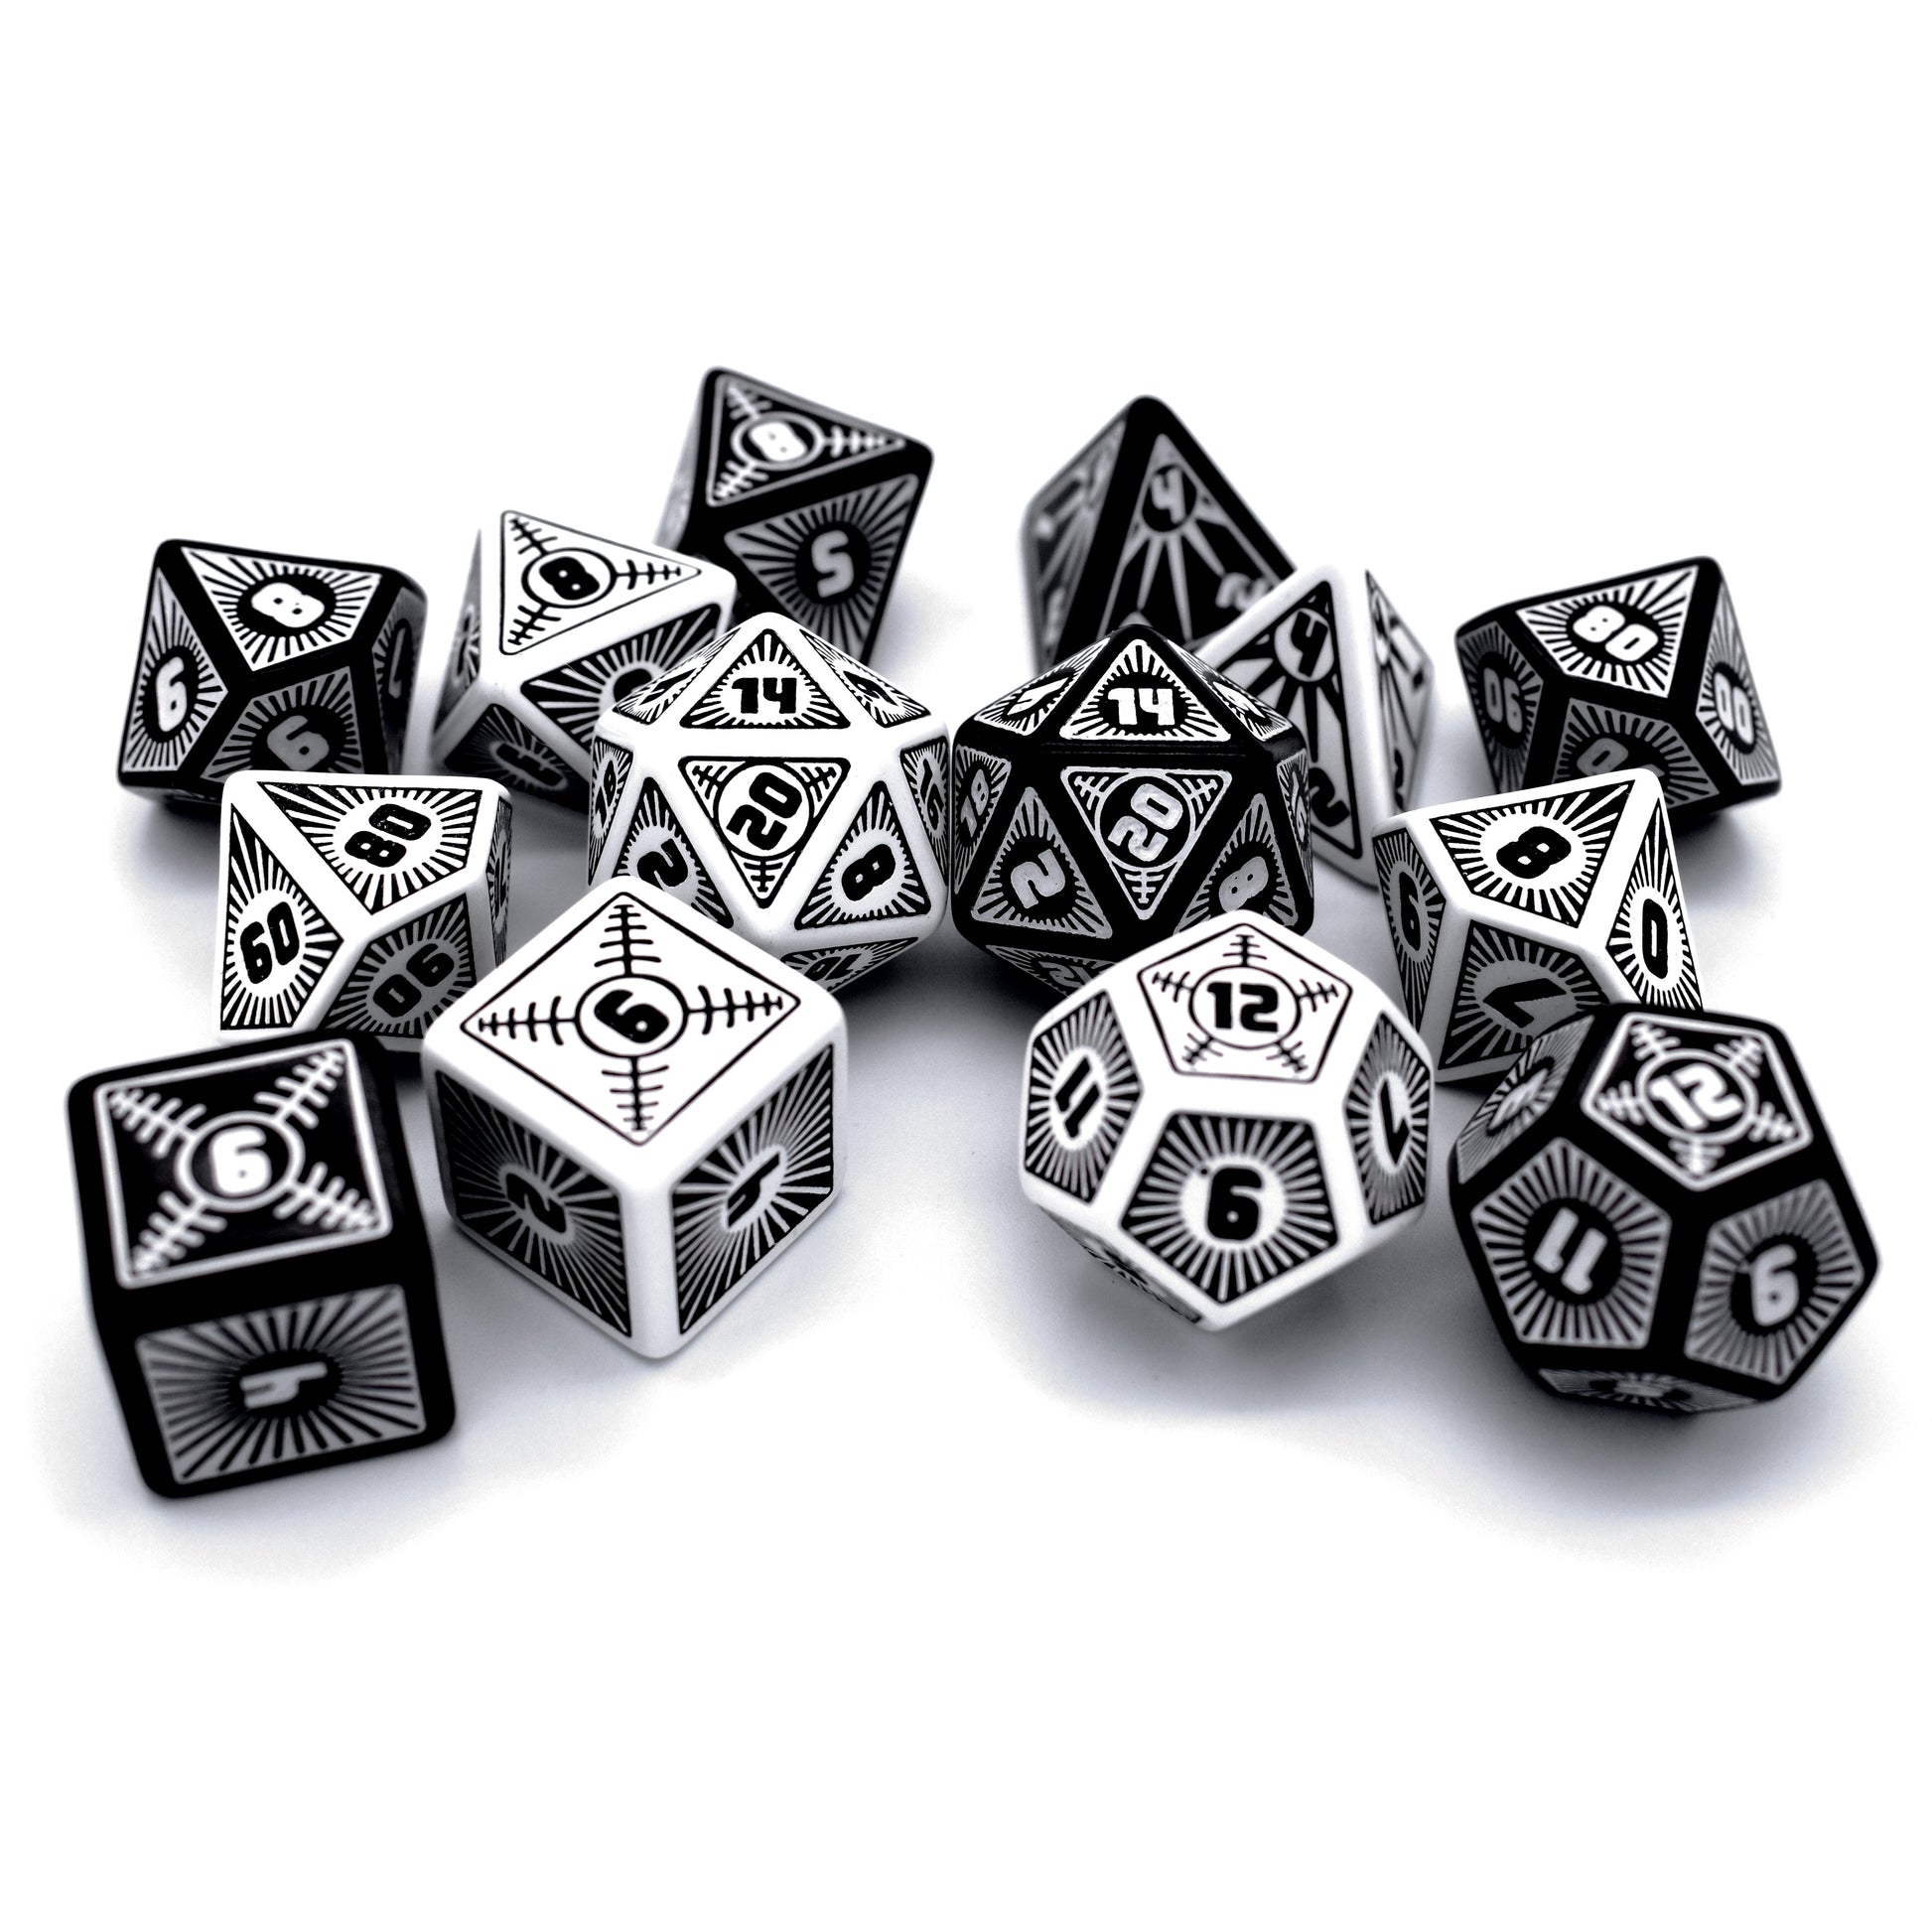 Alpha and Omega, 7-piece engraved black and white resin sets